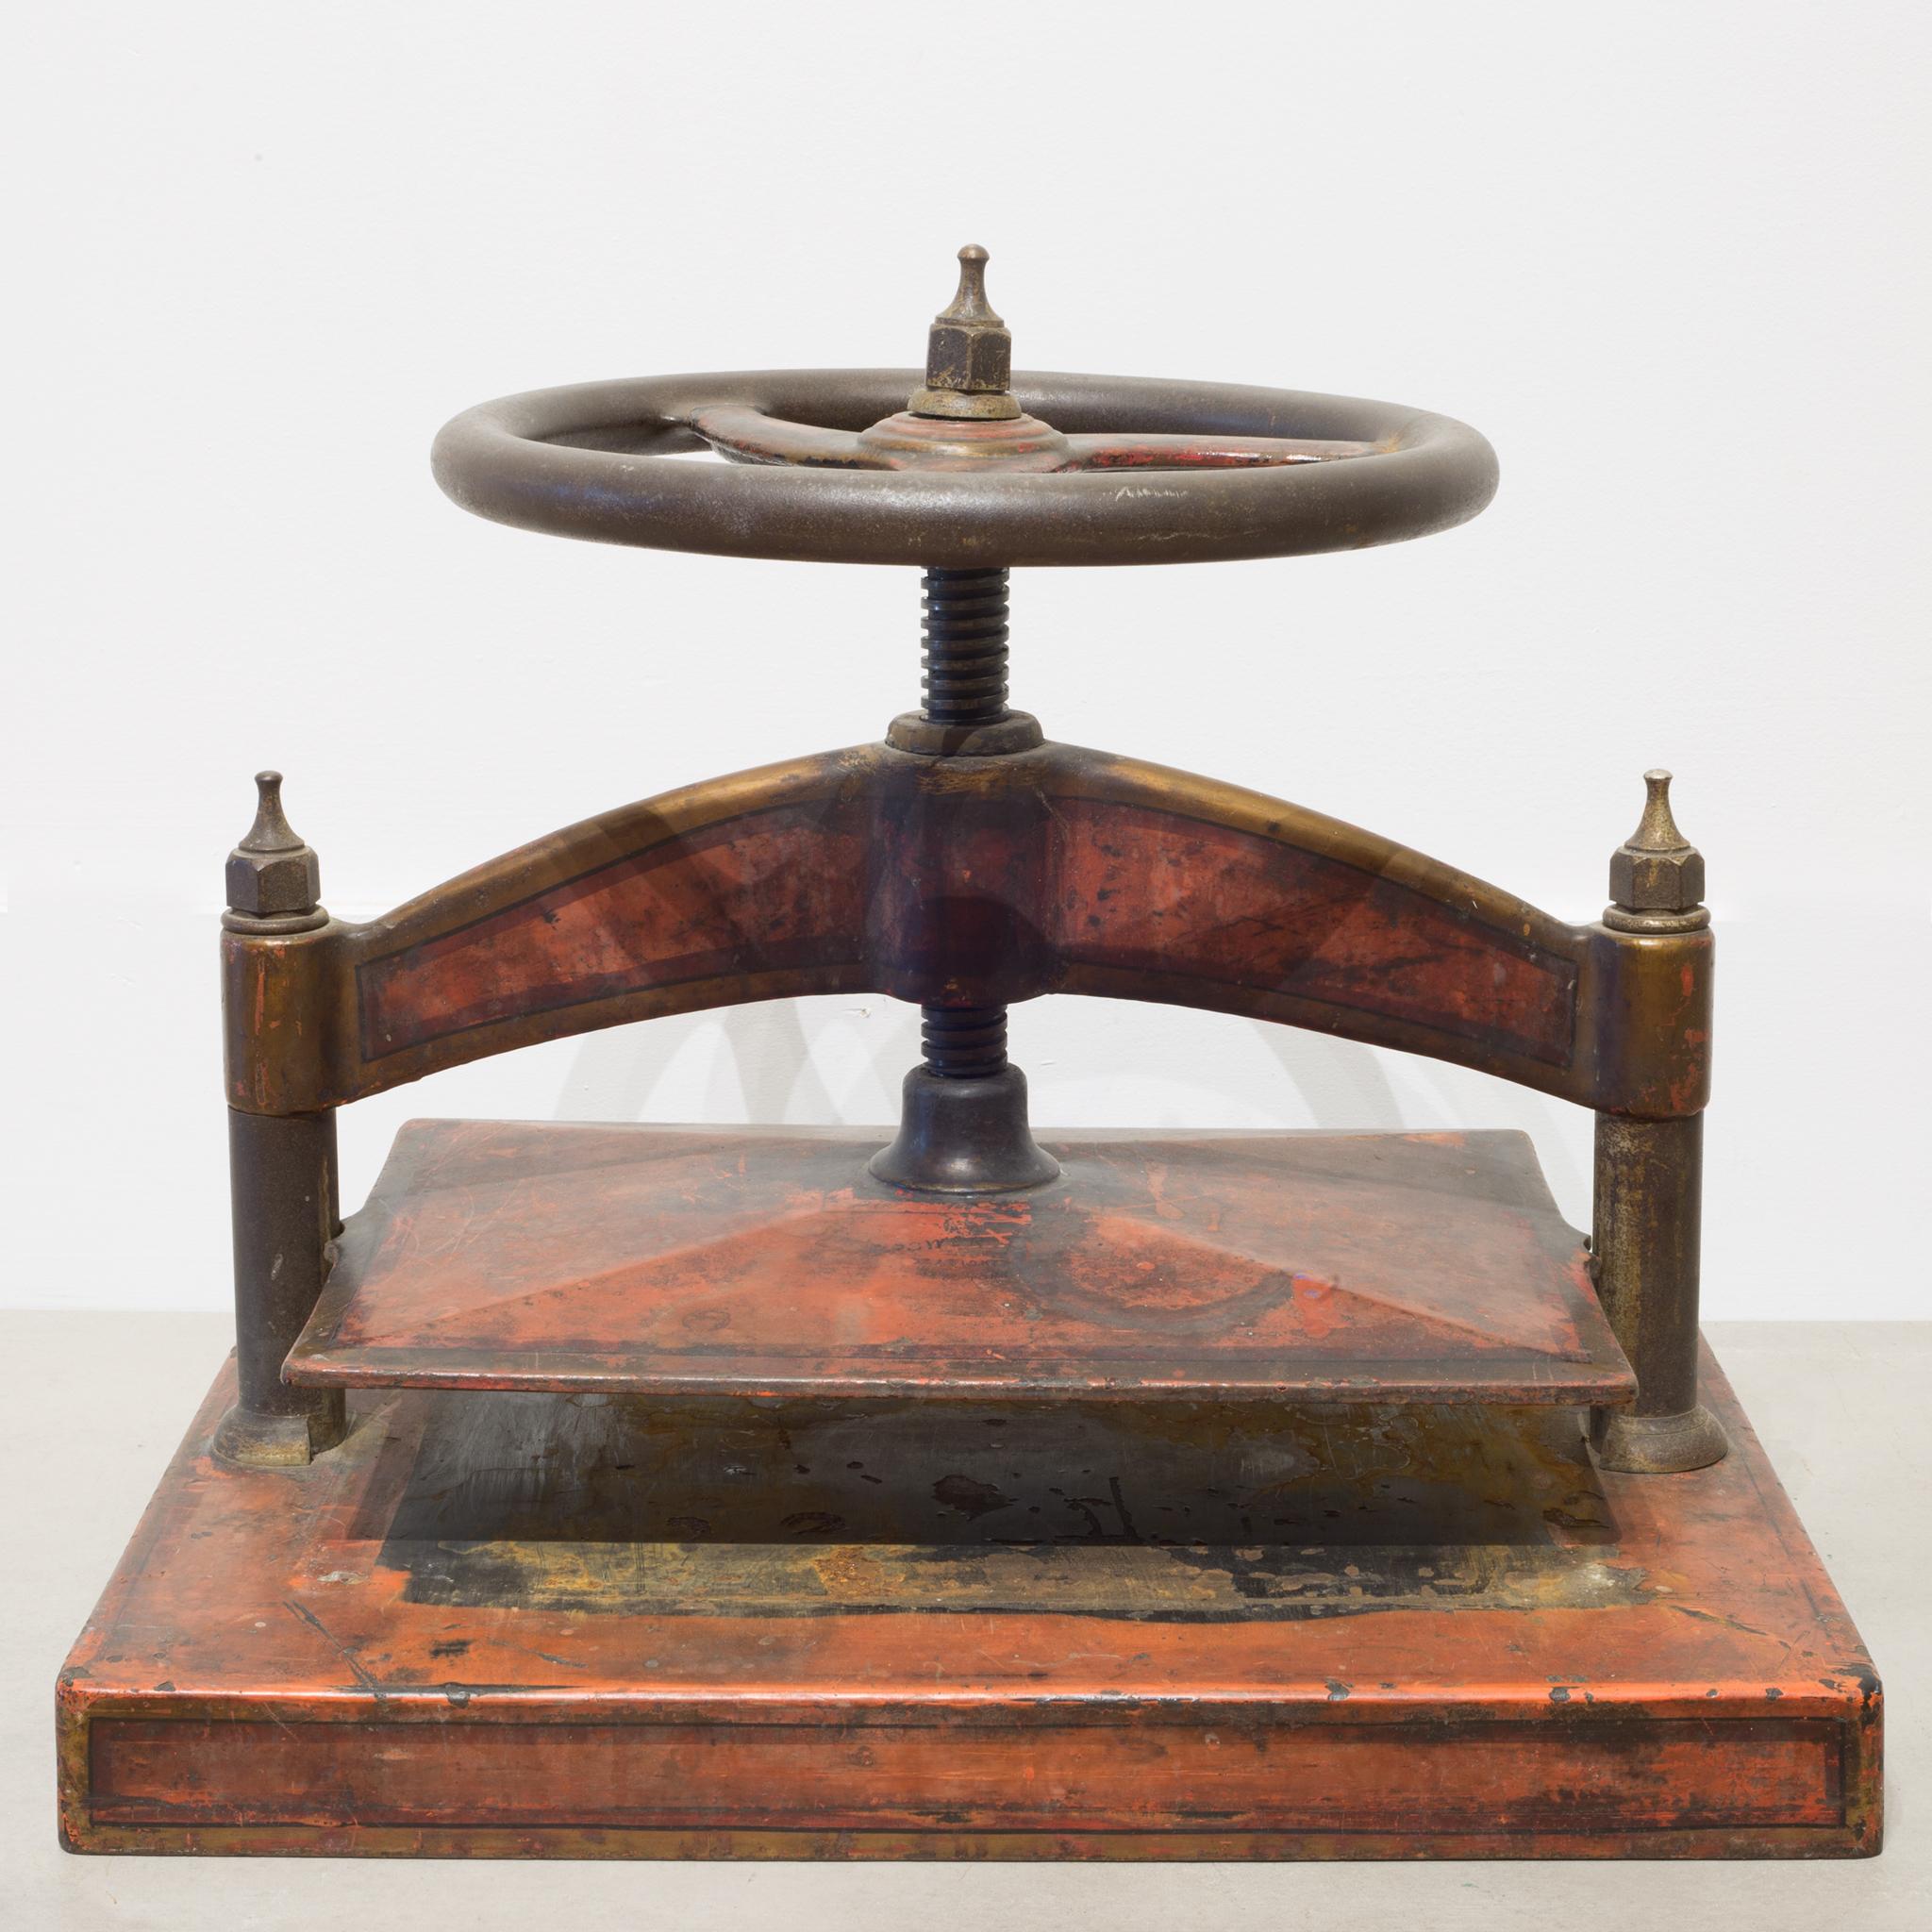 About

This is an antique cast iron red polychromed and stenciled wheel book press. The handle works properly and moves up and down. The press has retained some of the original stenciling on the body and is structurally sound.

Creator